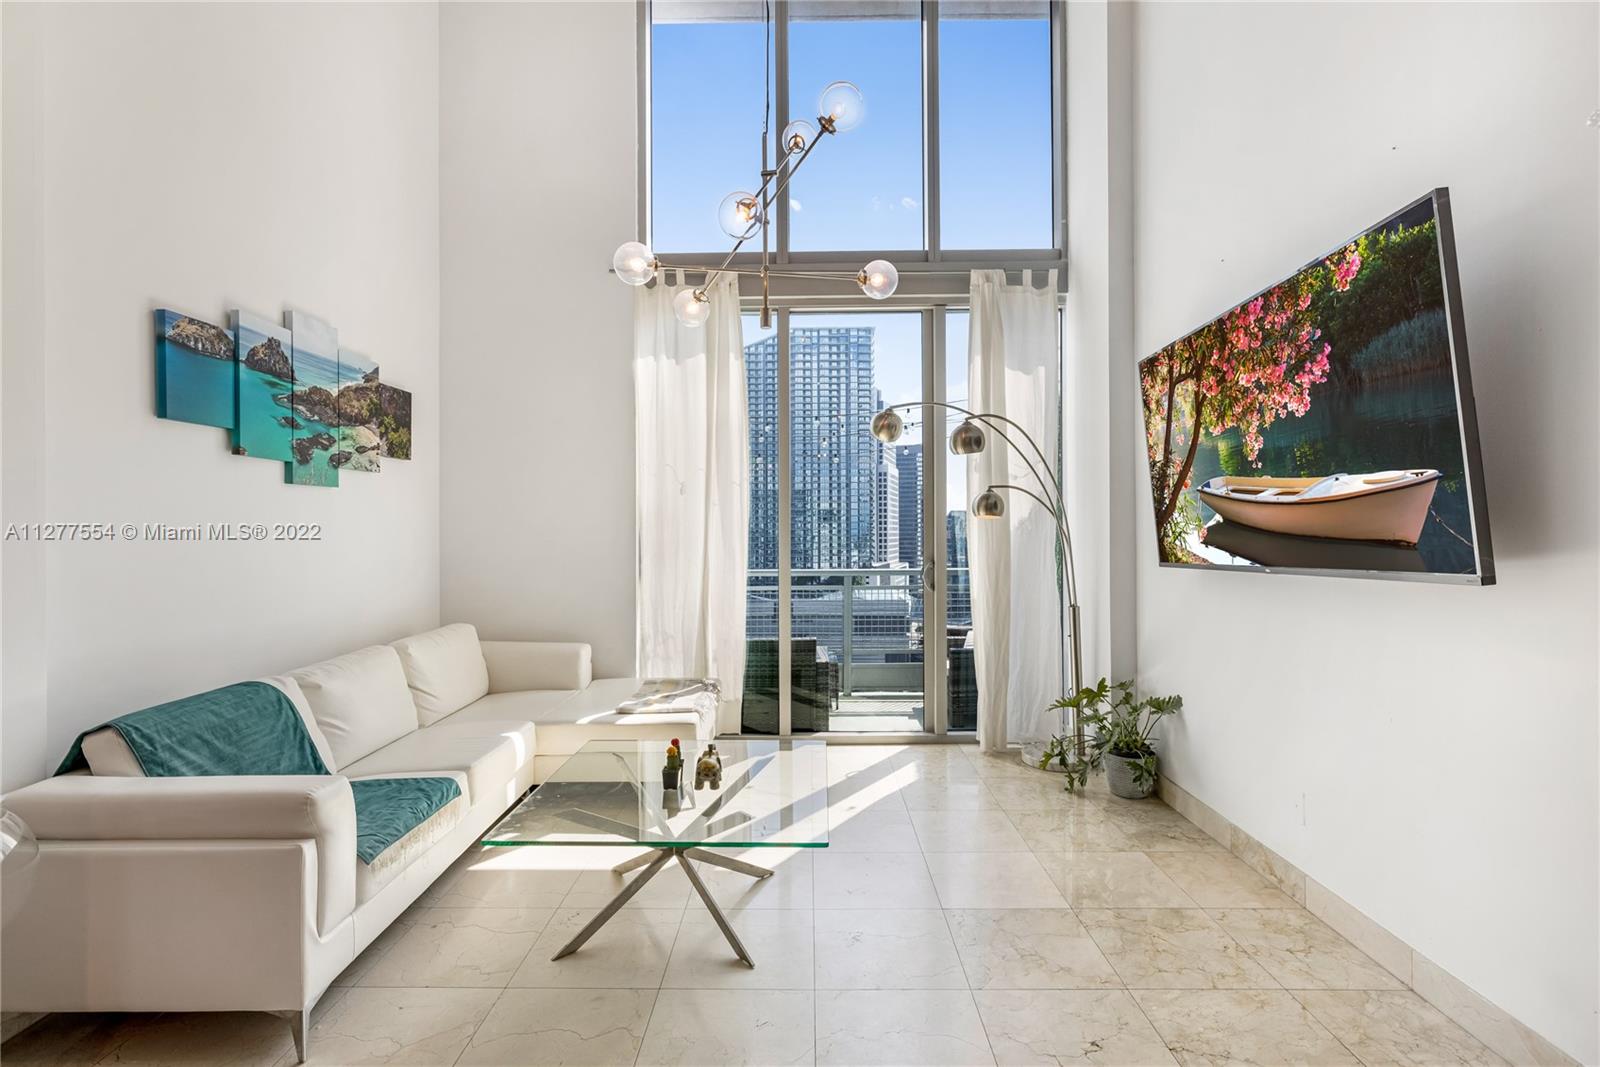 Spectacular 2 BR/2.5 BTH 2 story loft in Neo Vertika! Very spacious with loft style in Brickell - open layout residence featuring marble style tiles on the first floor and wood-like laminate on the second floor, granite countertop and SS appliances, high ceilings, double volume windows, and spectacular views of the river and city through two balconies. This building has impeccable management, amazing amenities including pool, lounge area, 1 gym, 1 dojo, 1 cross fit space, party room, management on site, 24 hr security, attended lobby and valet parking. Location is amazing, two blocks from Brickell City Center. Easy access to freeways, close to everything! One of a kind property that will not last! Very easy to show. Owner motivated, bring all offers!!